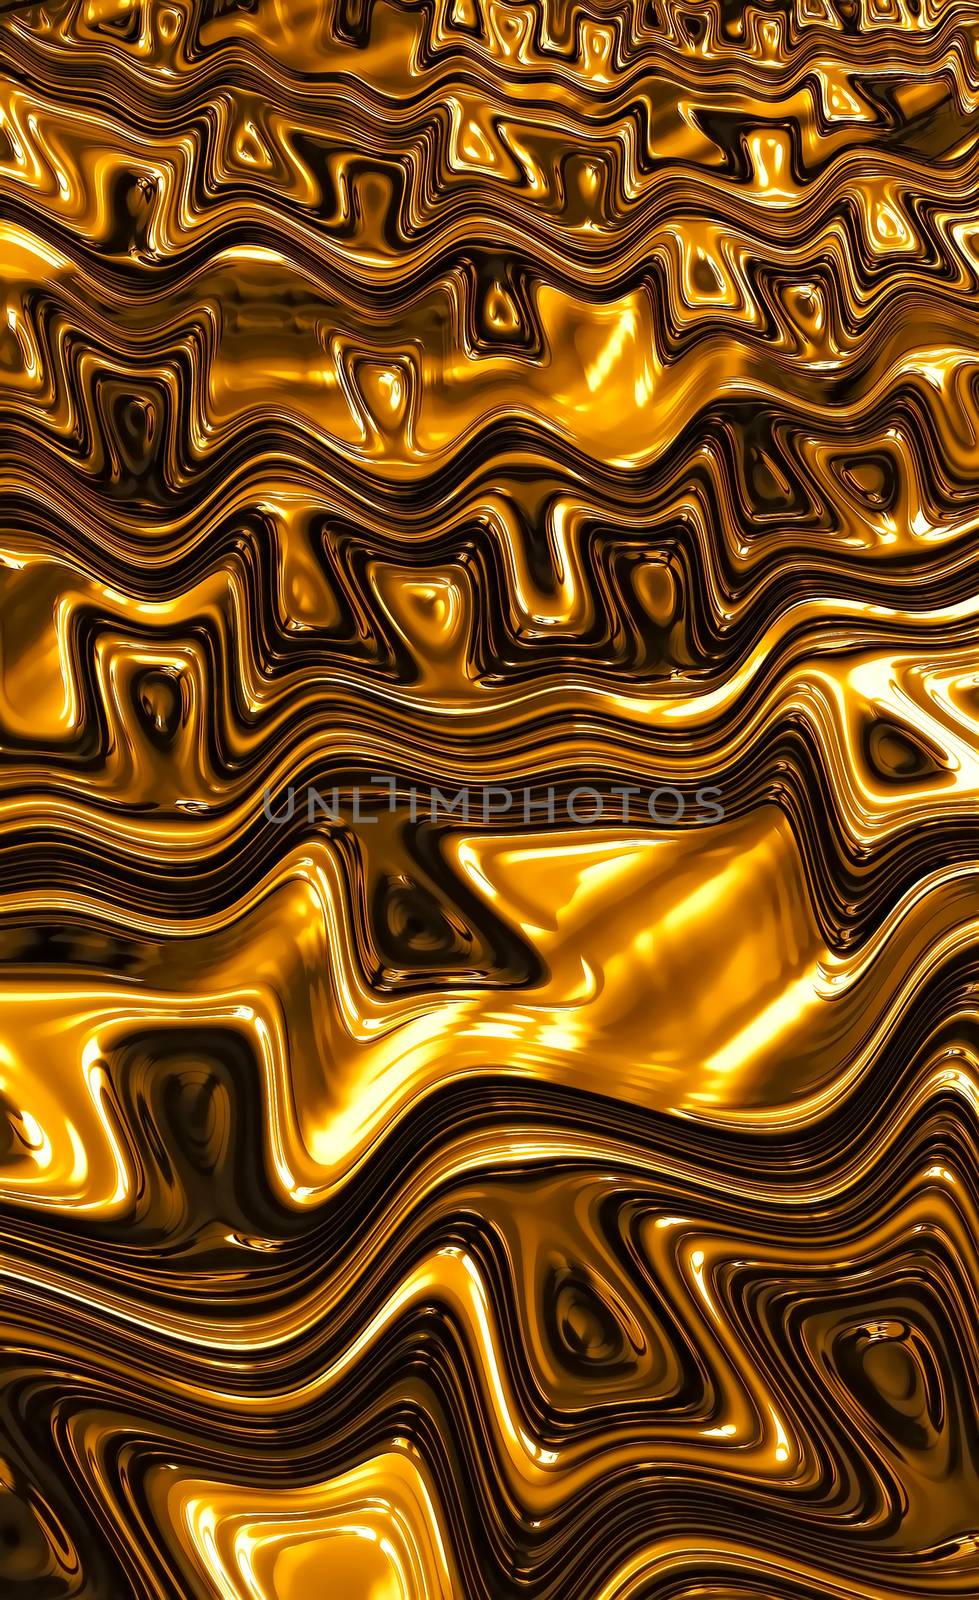 Gnarled background - abstract computer-generated image. Fractal geometry: chaos distortes lines and waves. For covers, posters, web design.